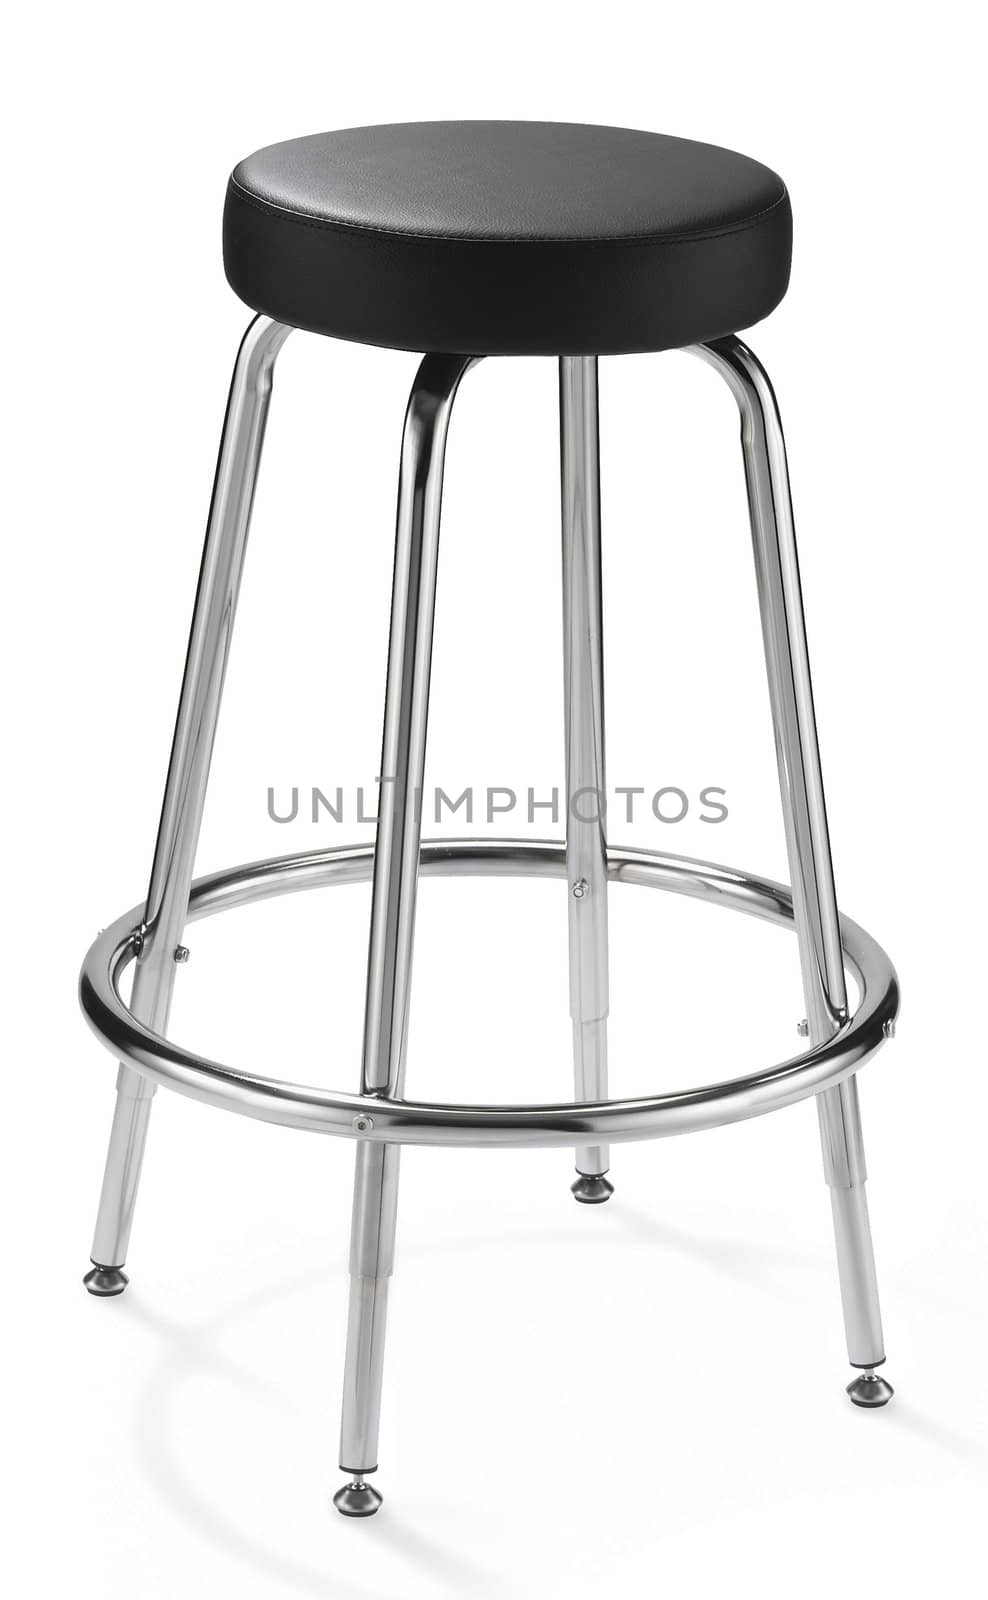 classical bar chair isolated on a white background